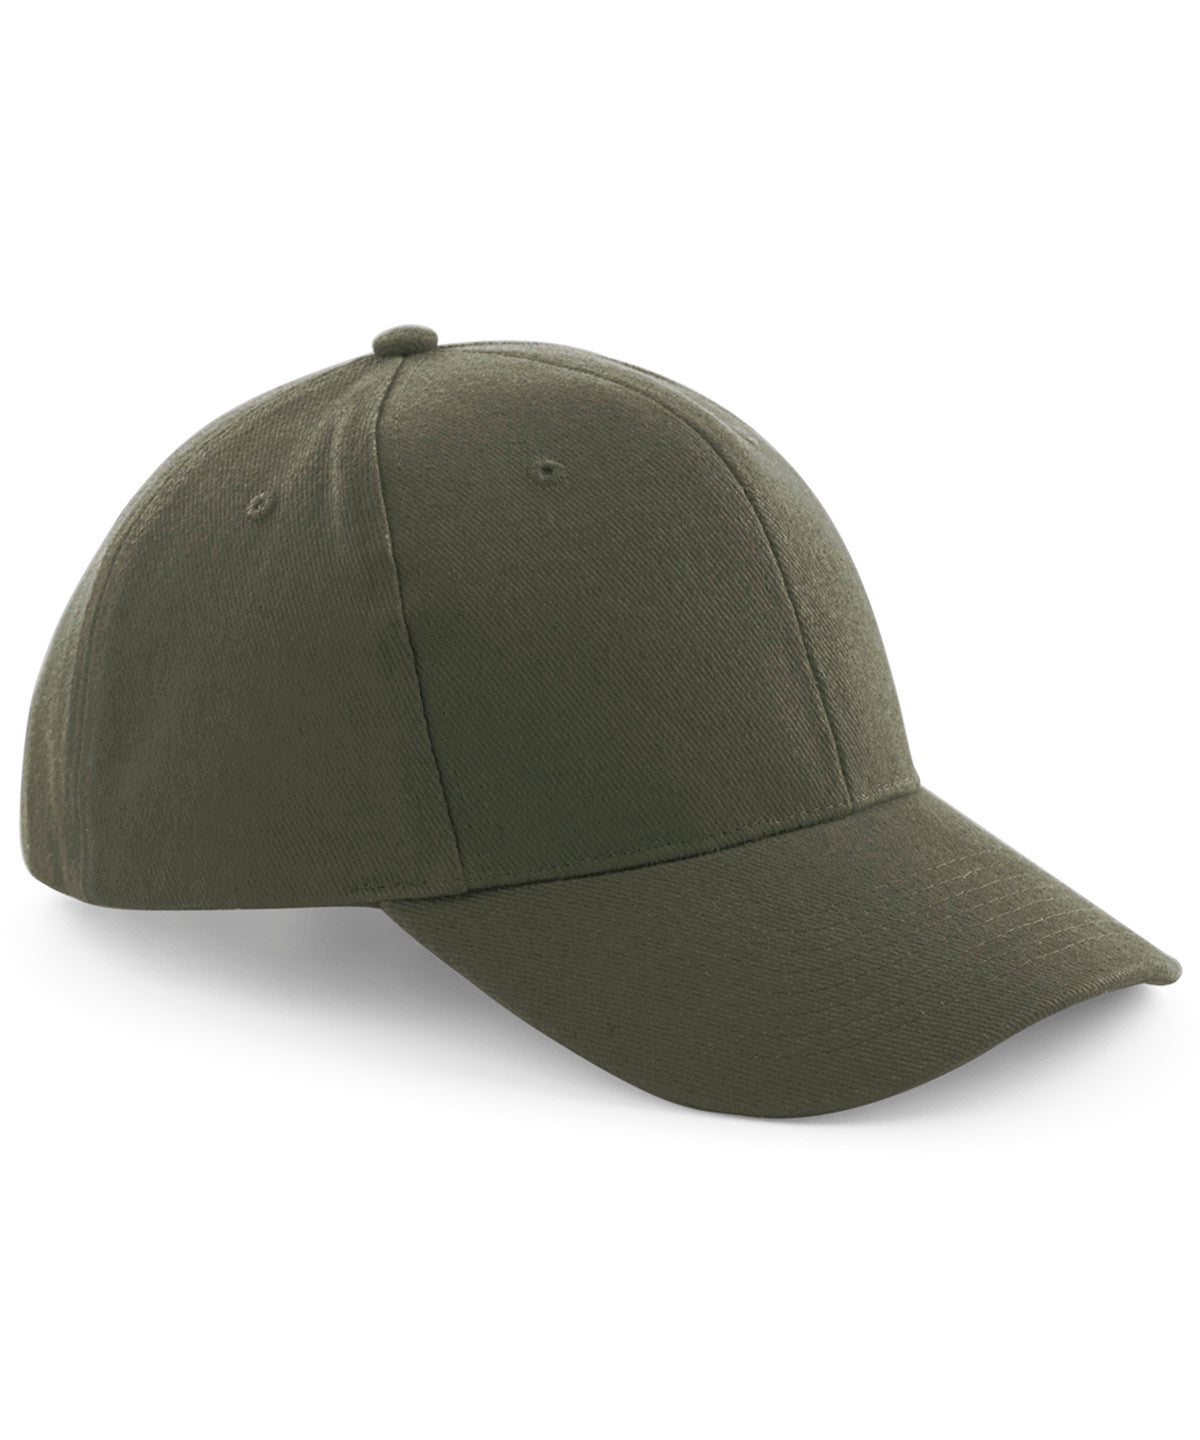 Personalised Caps - Olive Beechfield Pro-style heavy brushed cotton cap